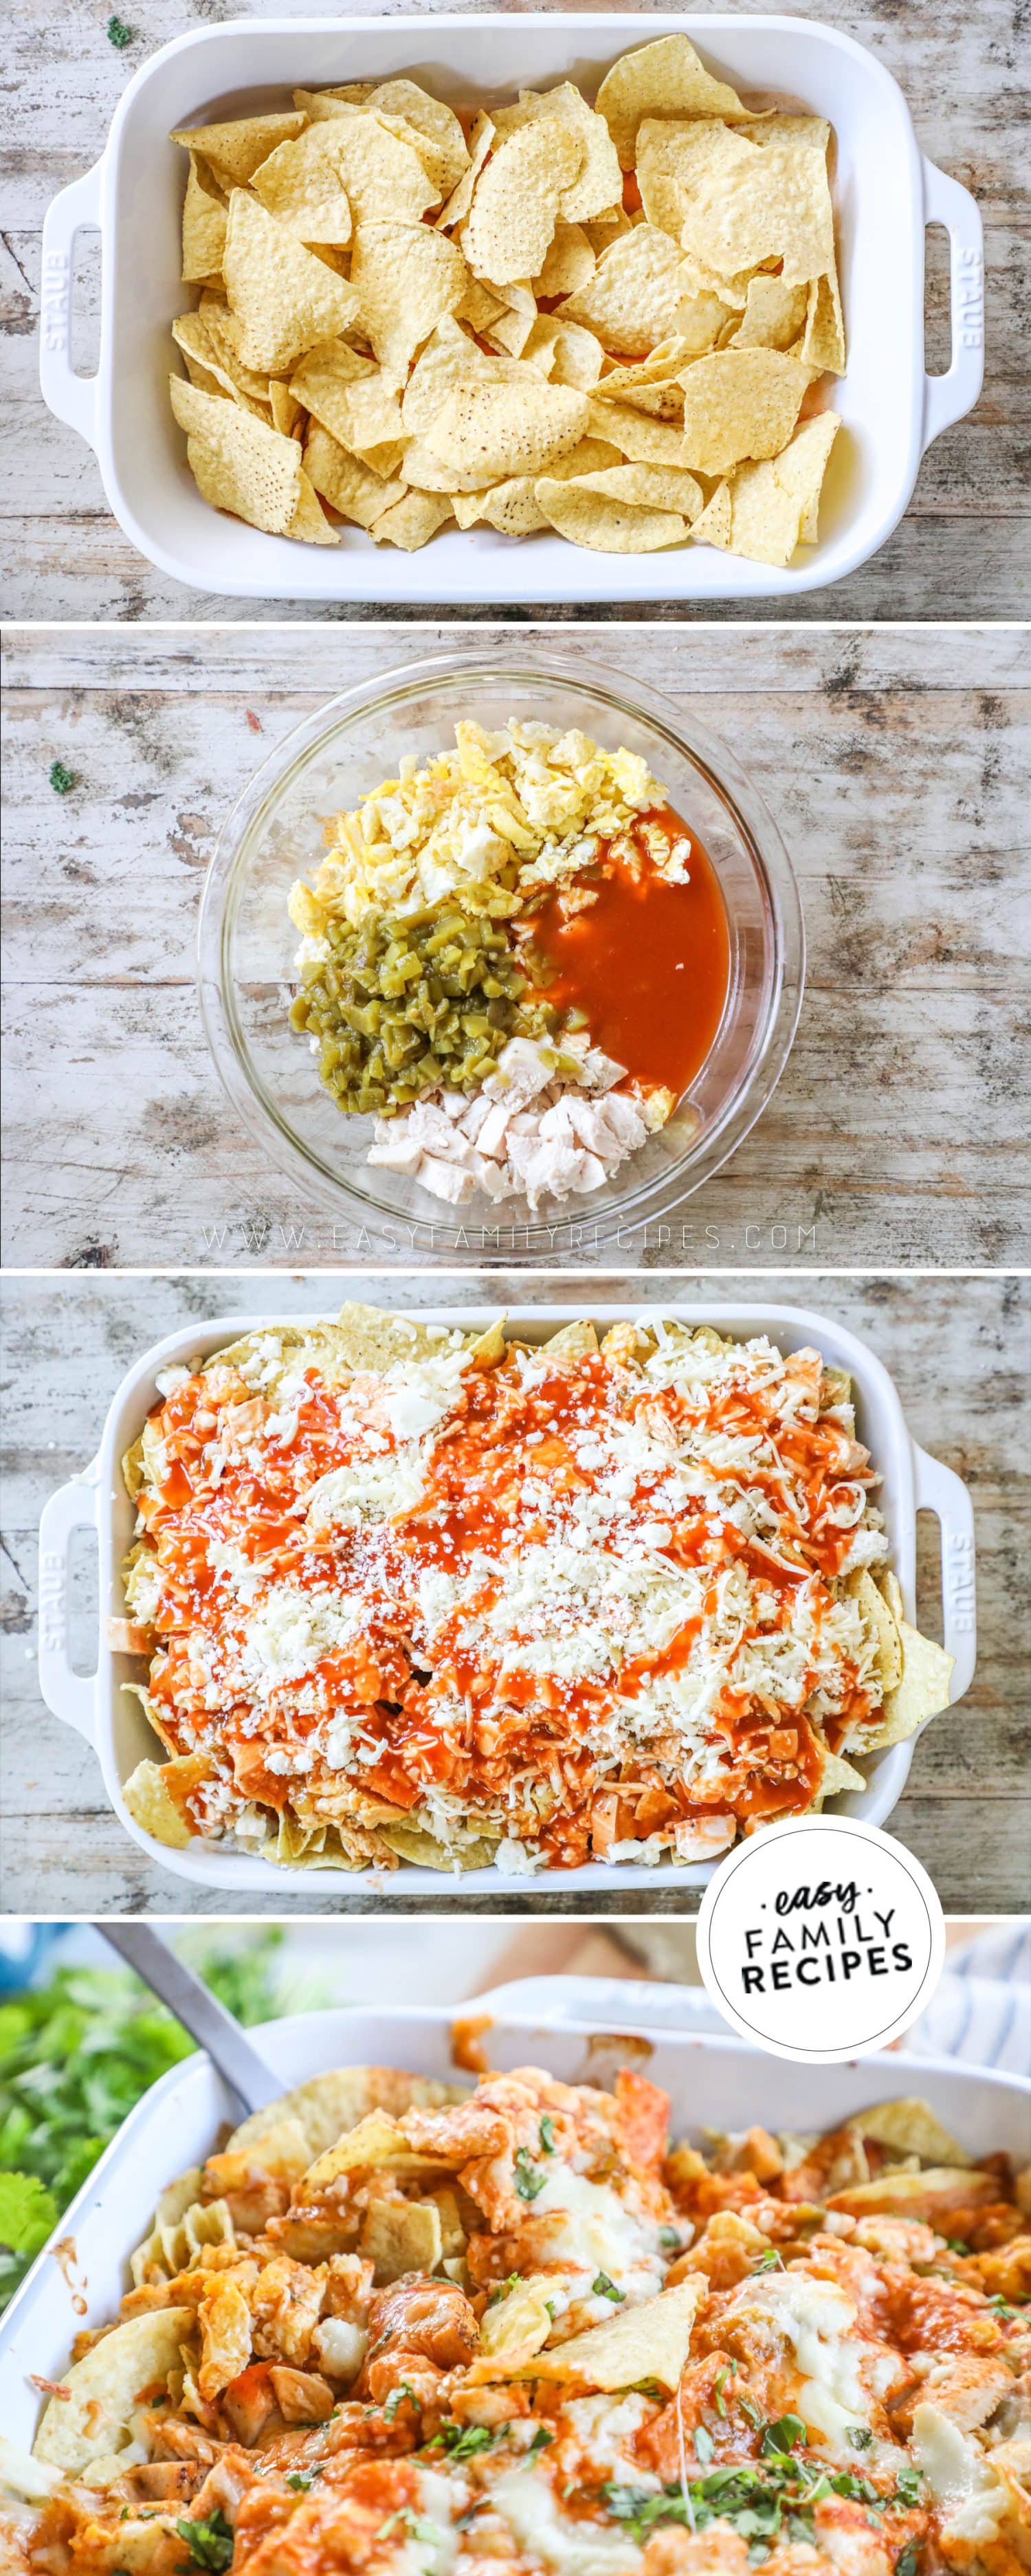 how to make chicken chilaquiles 1) add tortilla chips to a casserole dish, 2) mix the chicken filling, 3)add to the casserole dish, 4)bake and serve.